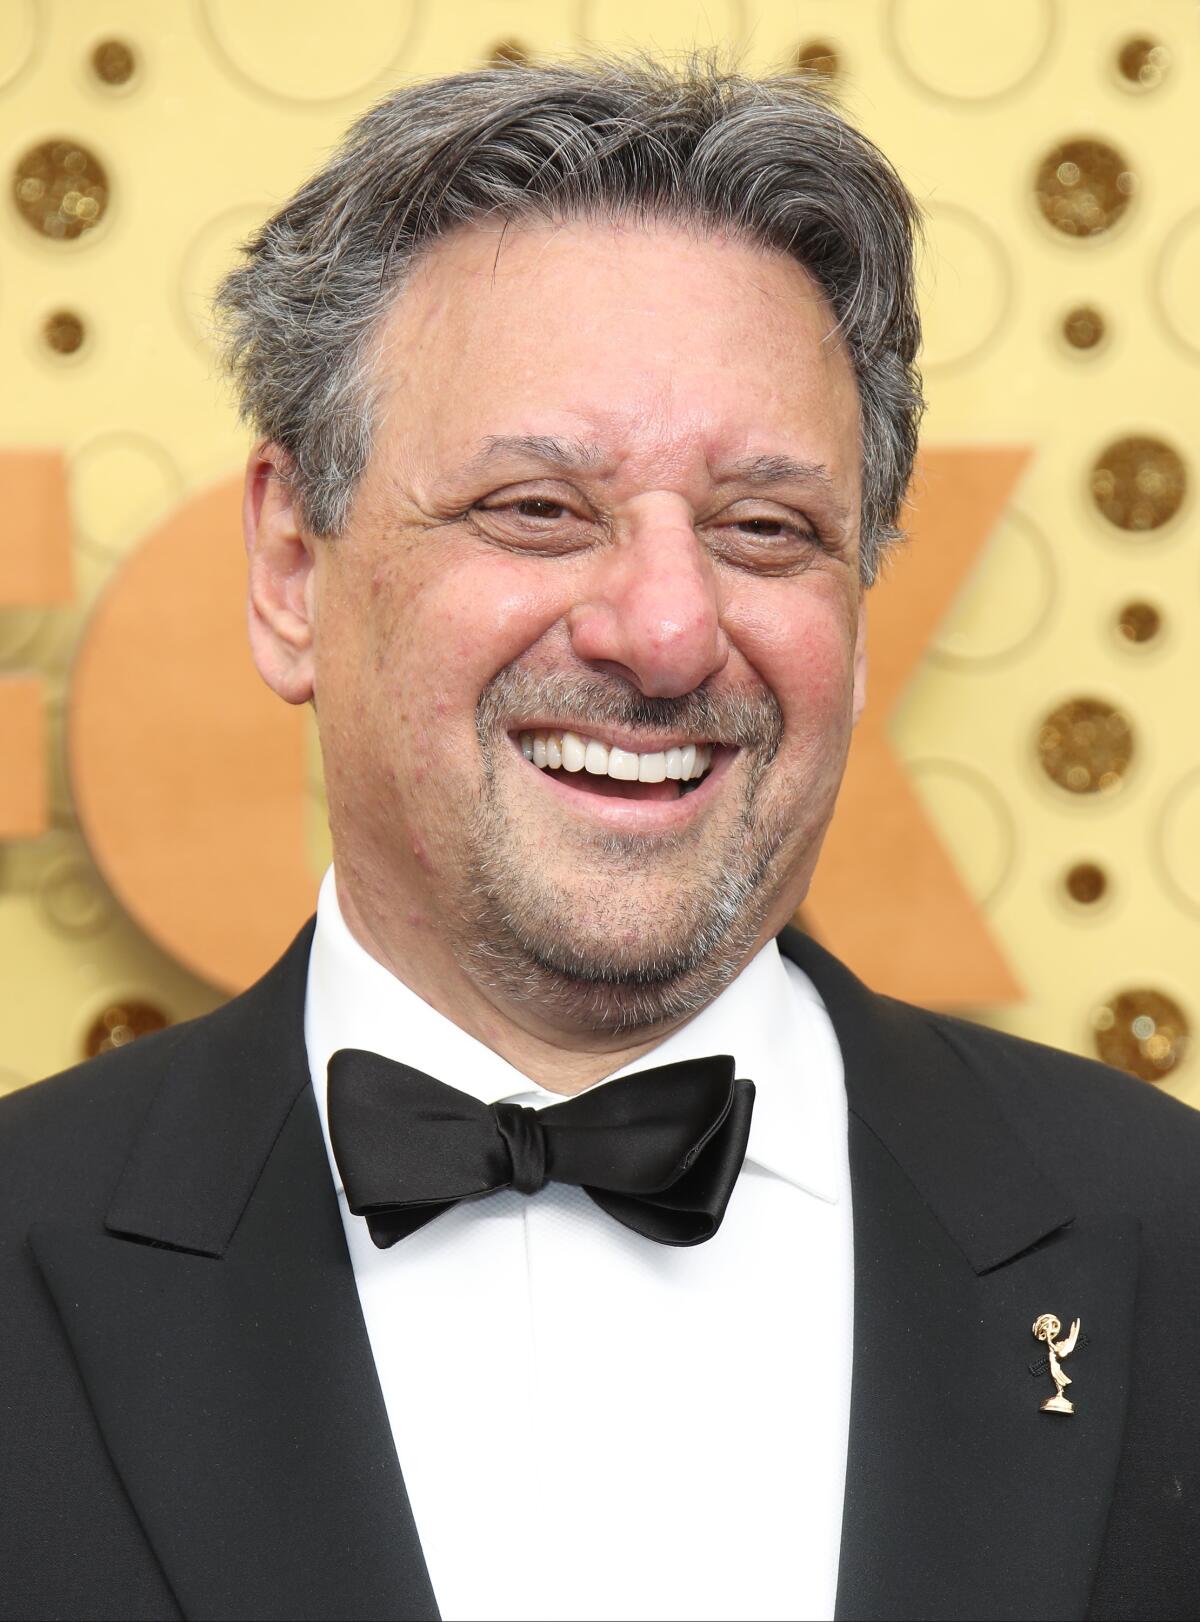 A smiling man at an awards ceremony wearing an Emmy pin